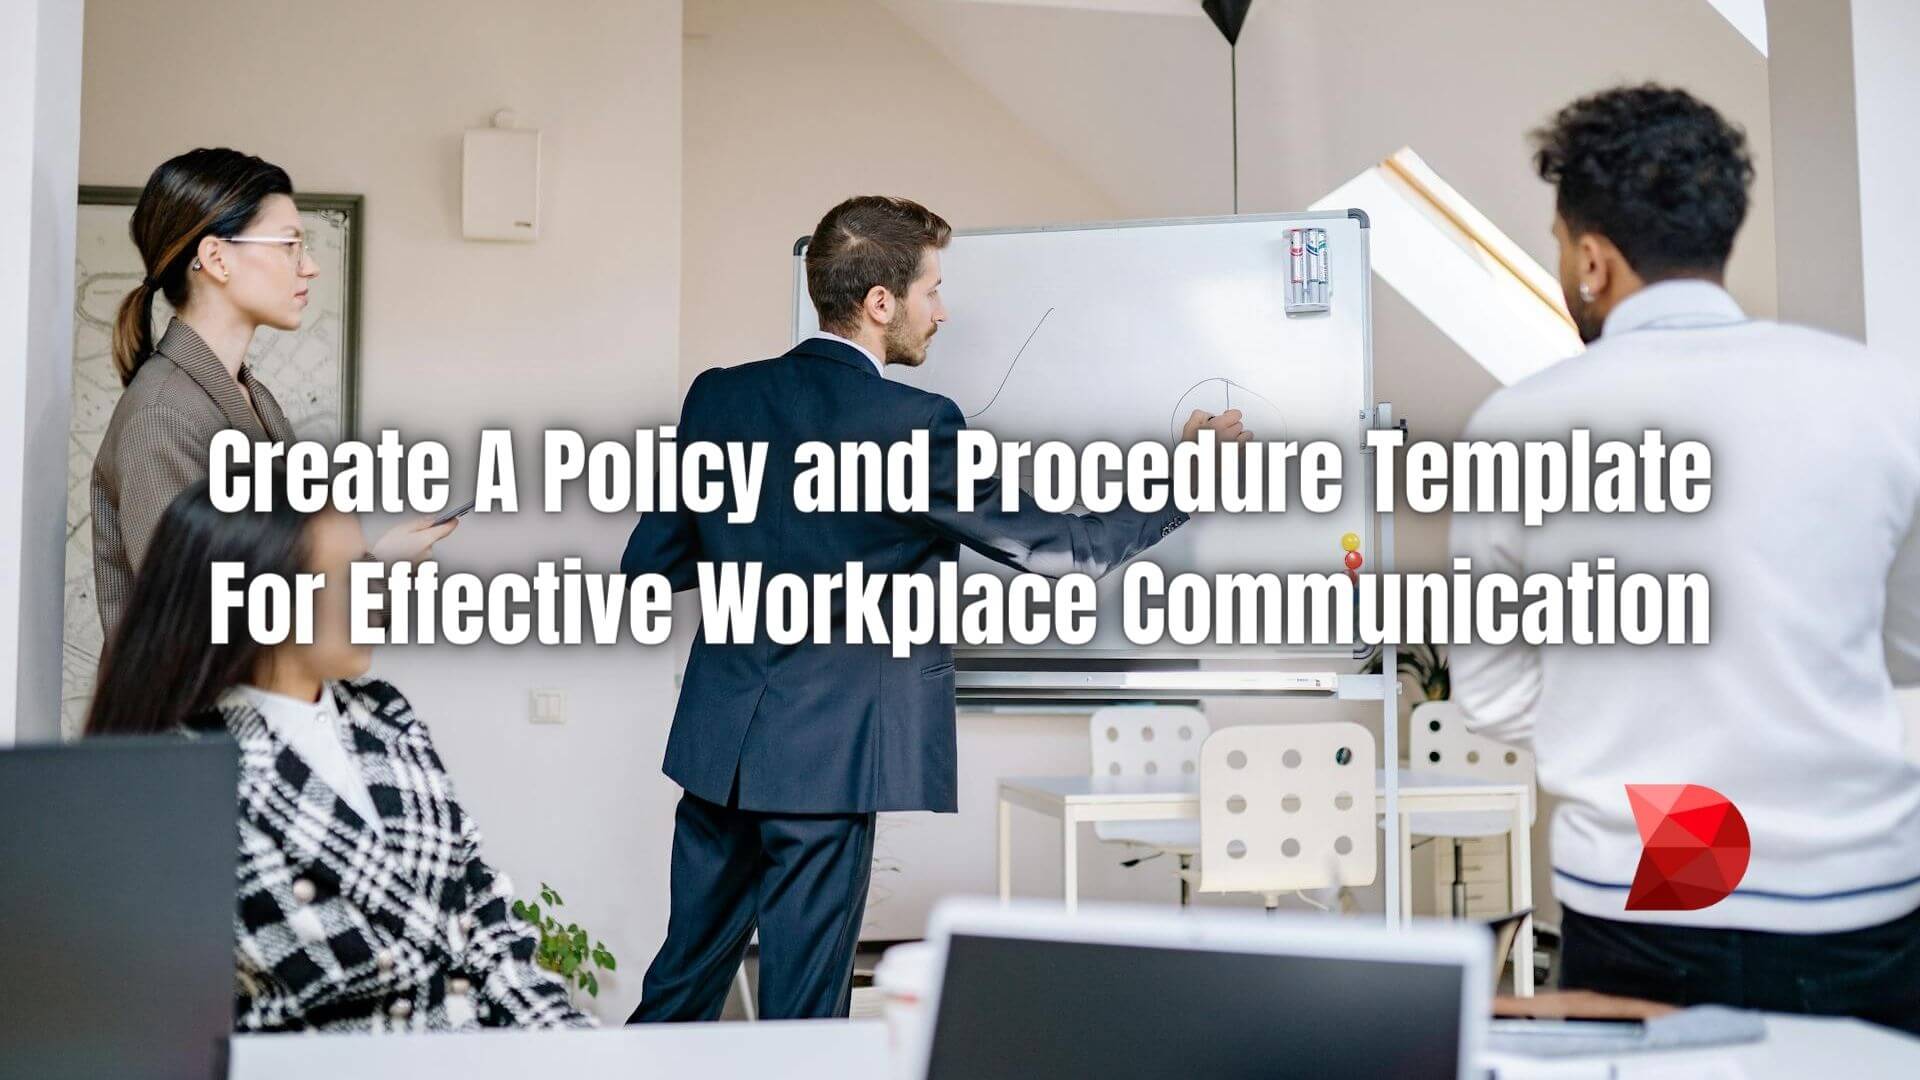 Transform workplace communication! Click here to learn how to develop a precise policy and procedure template for seamless team interaction.